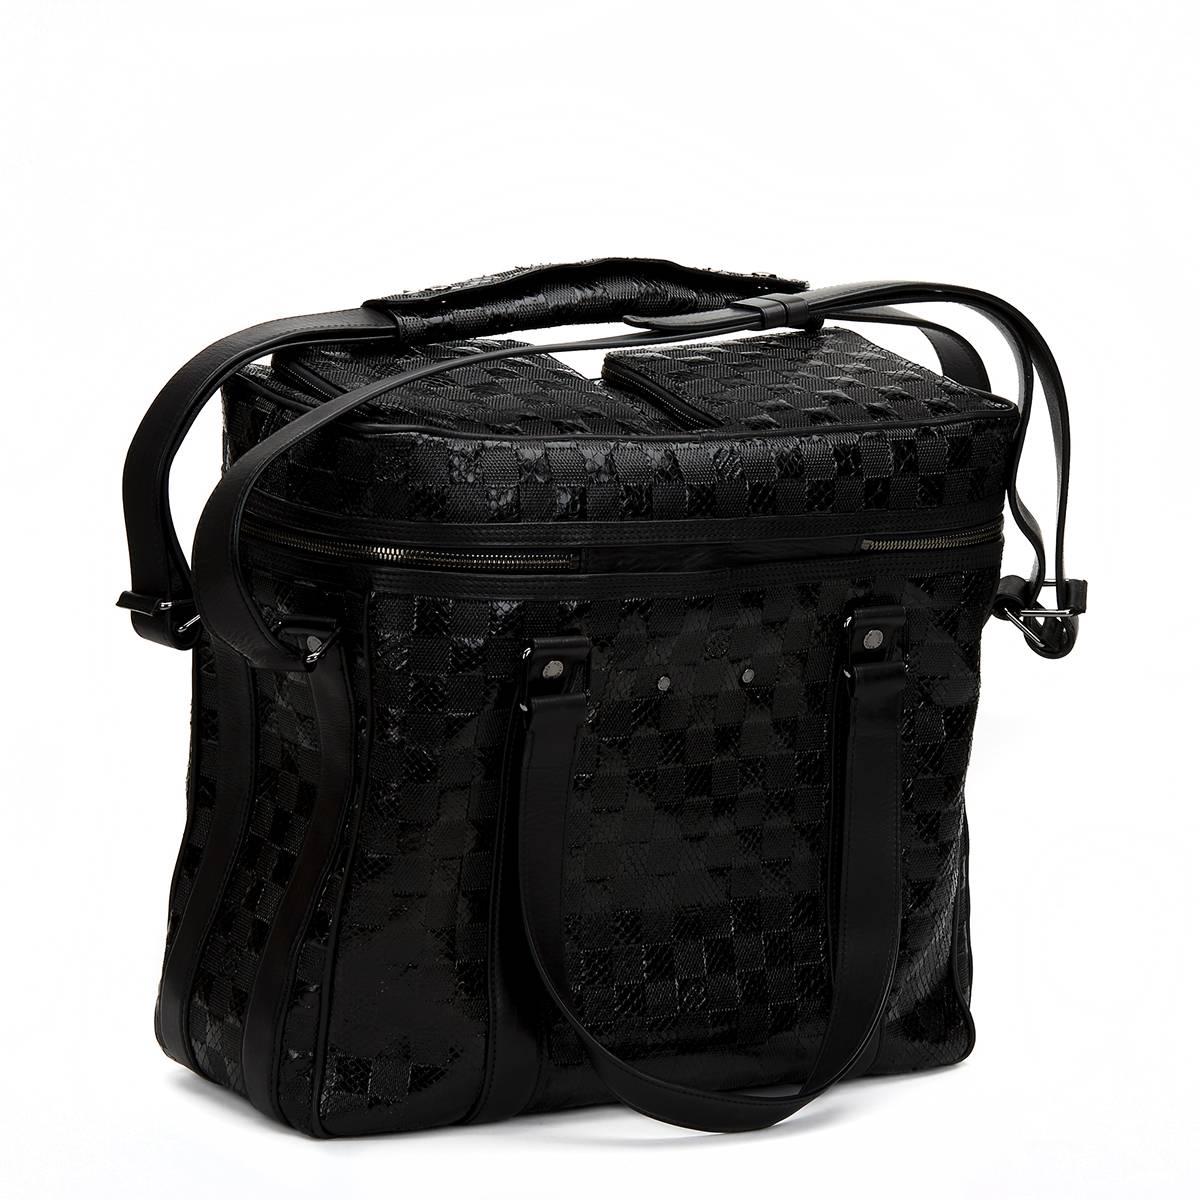 LOUIS VUITTON
Black Damier Python DJ Bag

 Reference: CB102
Serial Number: FO0068
Age (Circa): 2008
Authenticity Details: Serial Stamp (Made in Italy)
Gender: Unisex
Type: Travel, Shoulder, Tote, Business

Colour: Black
Hardware: Silver
Material(s):